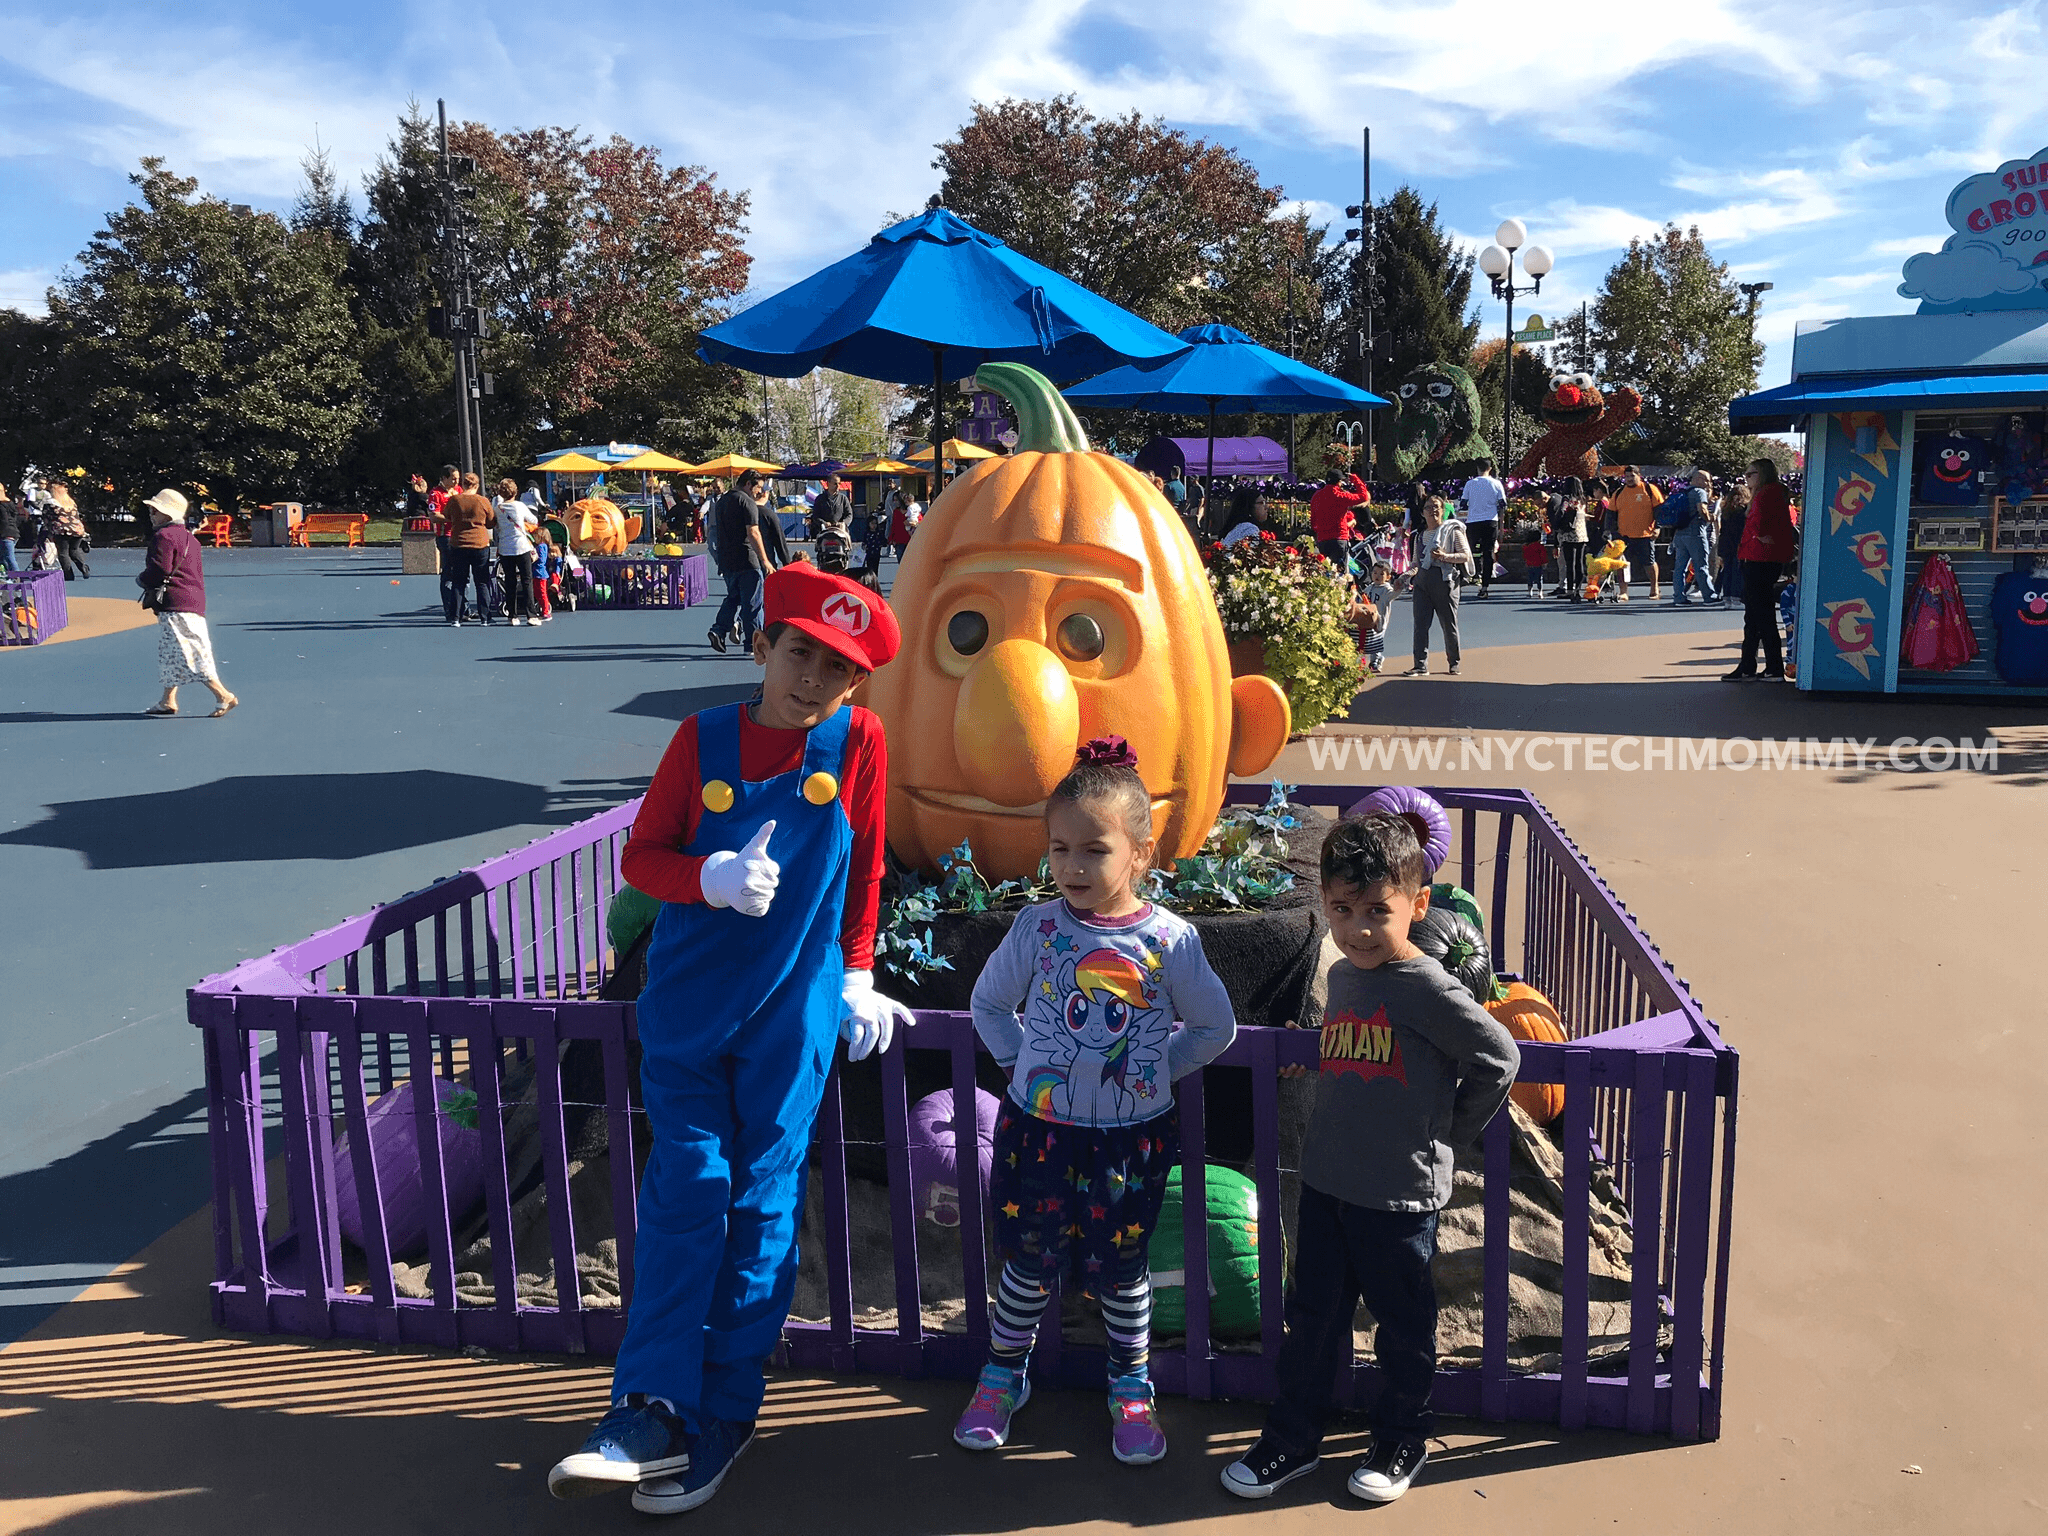 Count's Halloween Spooktacular at Sesame Place